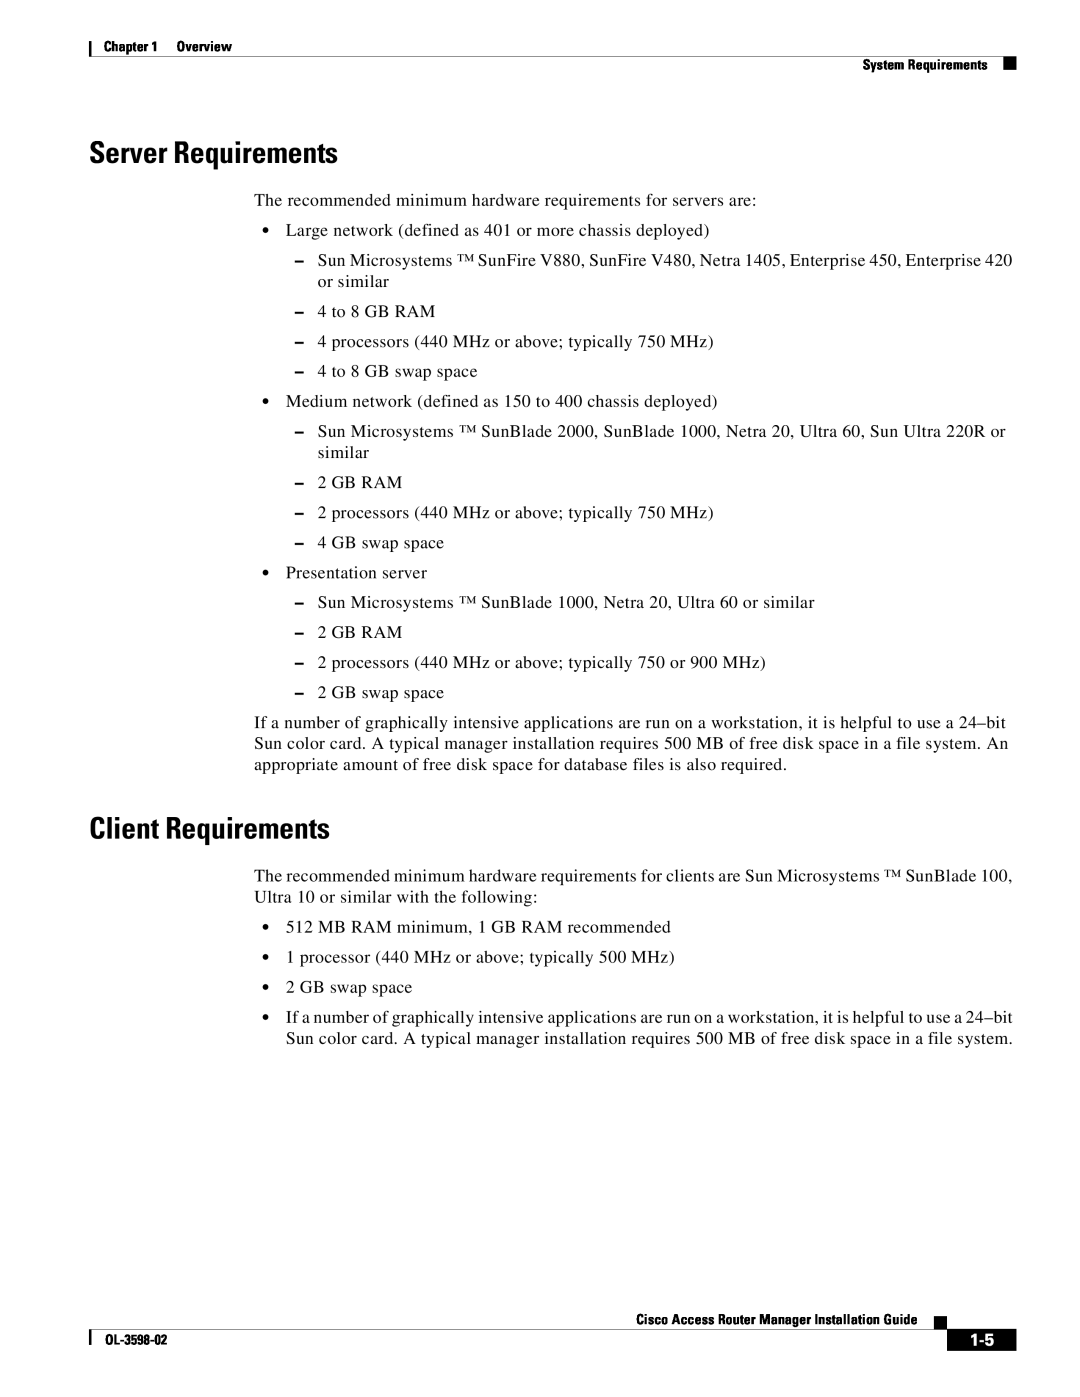 Cisco Systems OL-3598-02 manual Server Requirements, Client Requirements 